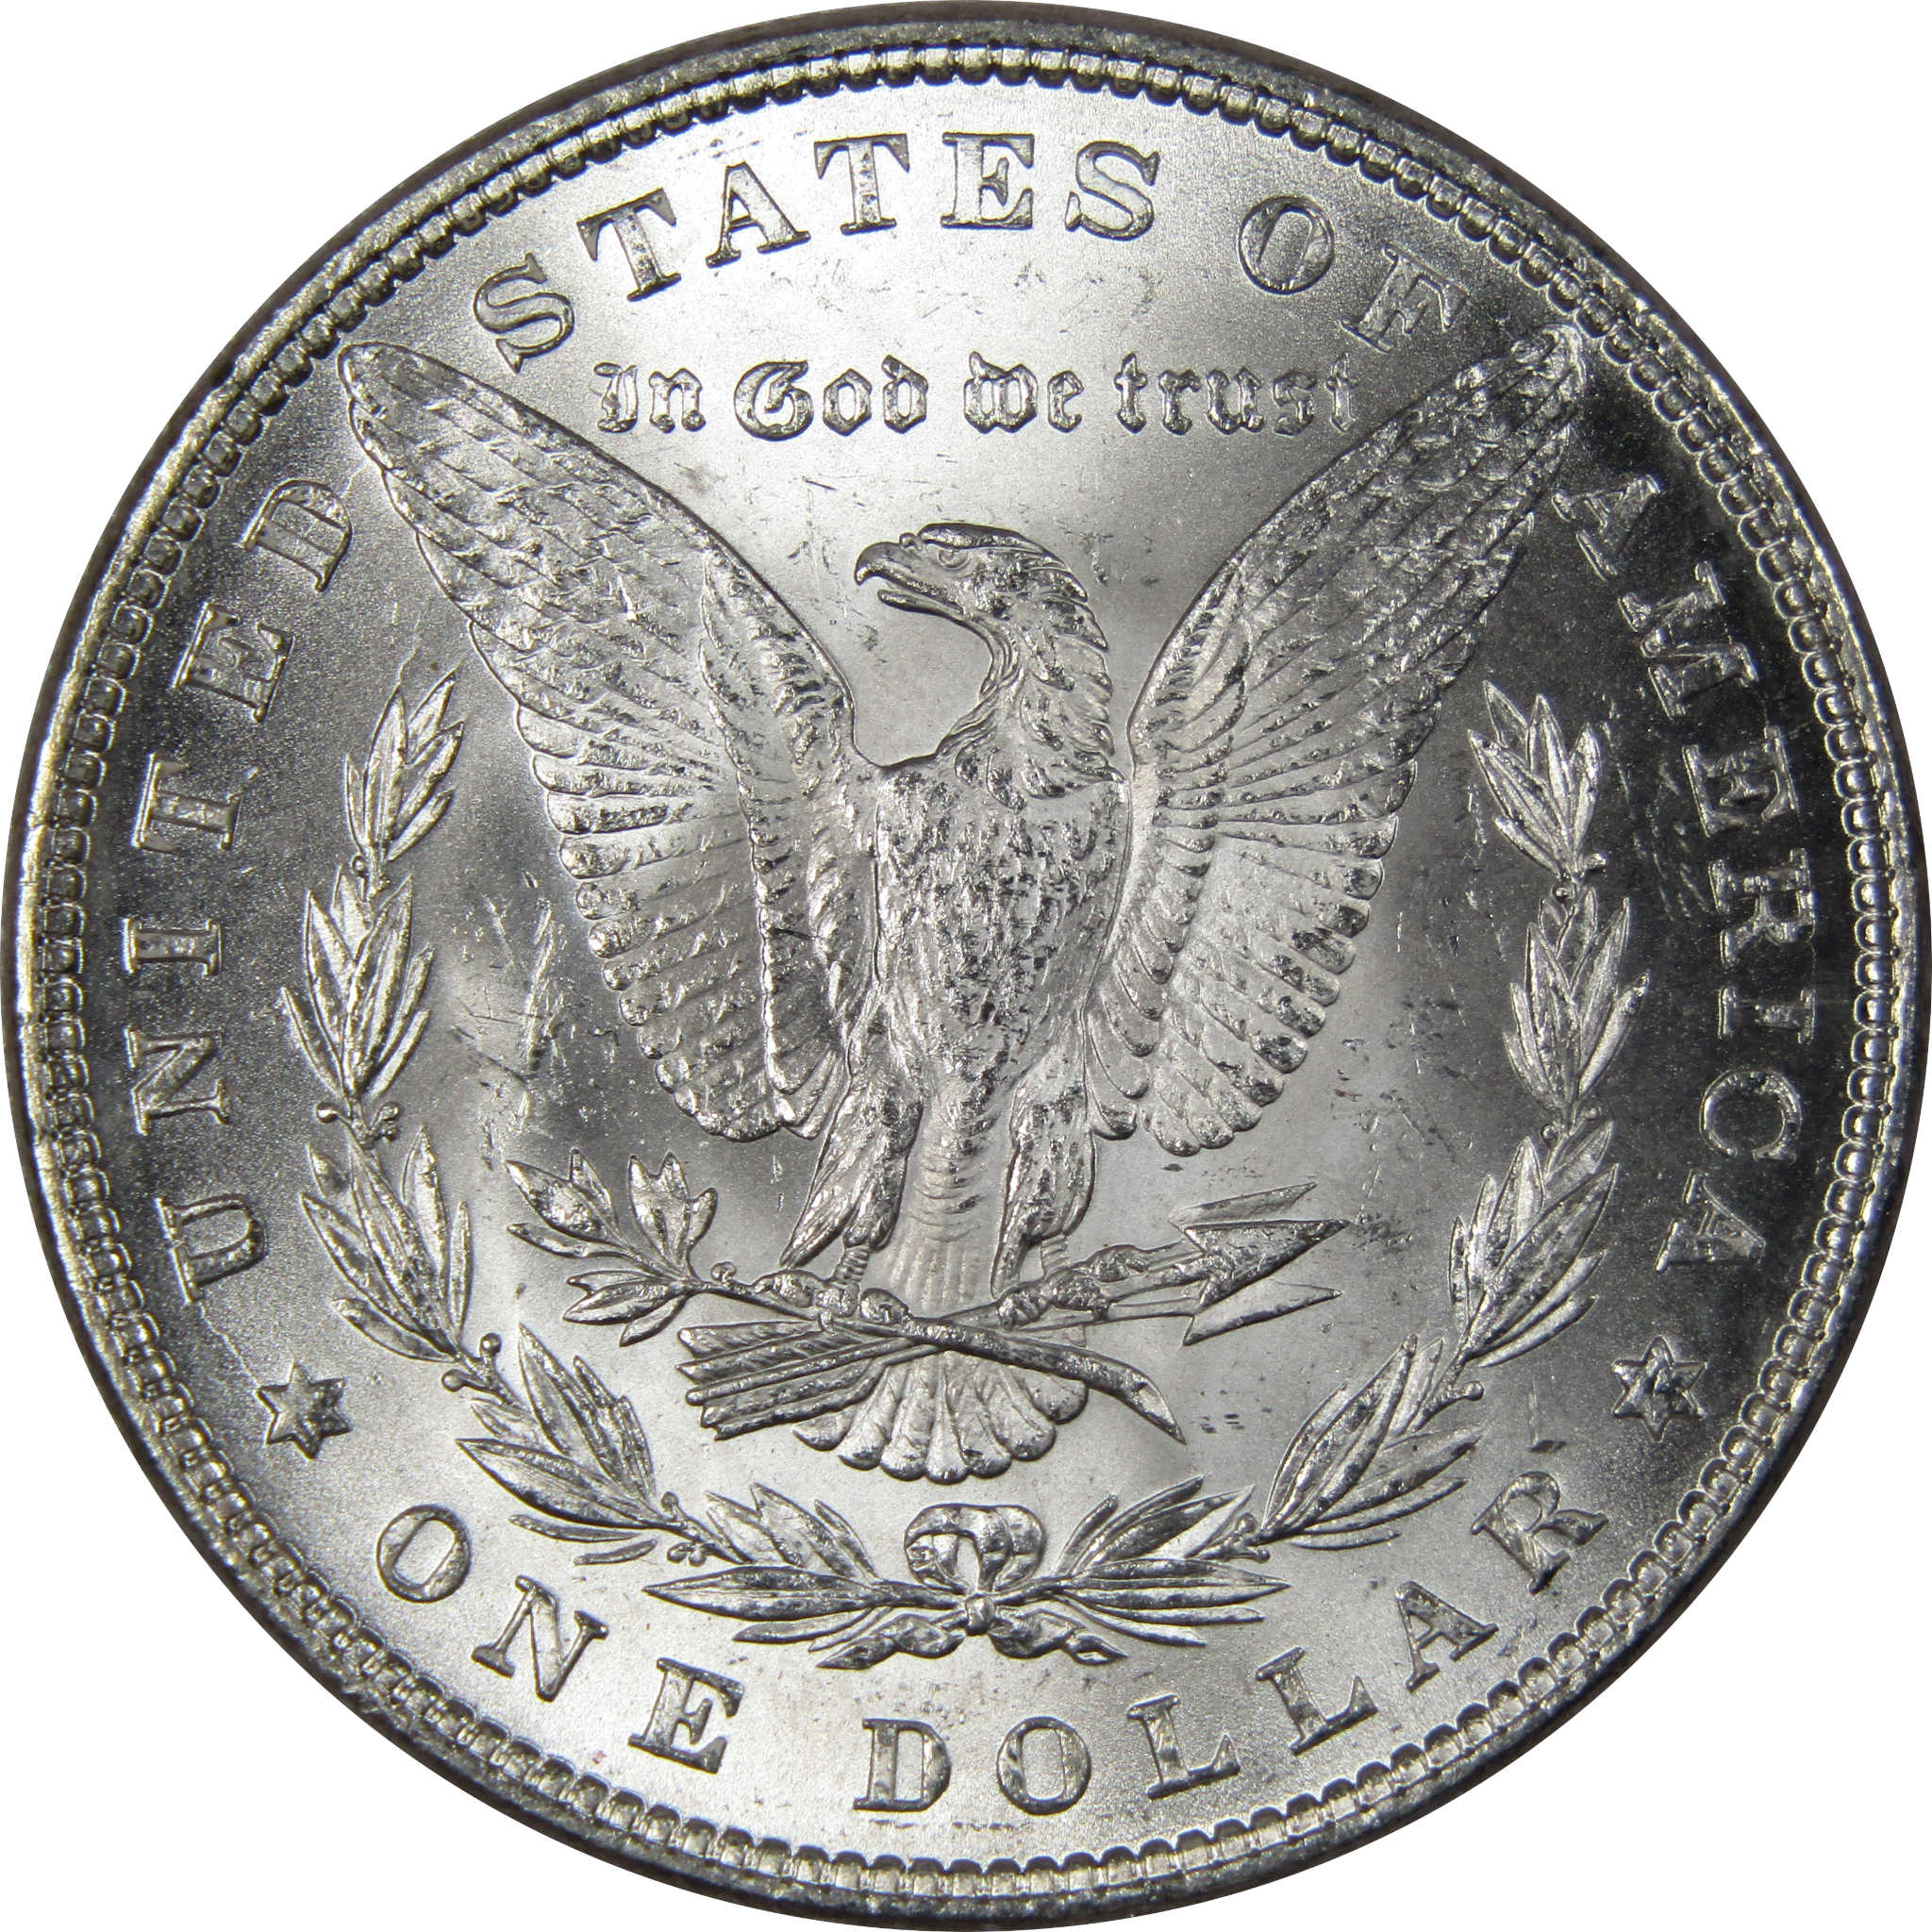 1882 Morgan Dollar BU Uncirculated Mint State 90% Silver SKU:IPC9715 - Morgan coin - Morgan silver dollar - Morgan silver dollar for sale - Profile Coins &amp; Collectibles